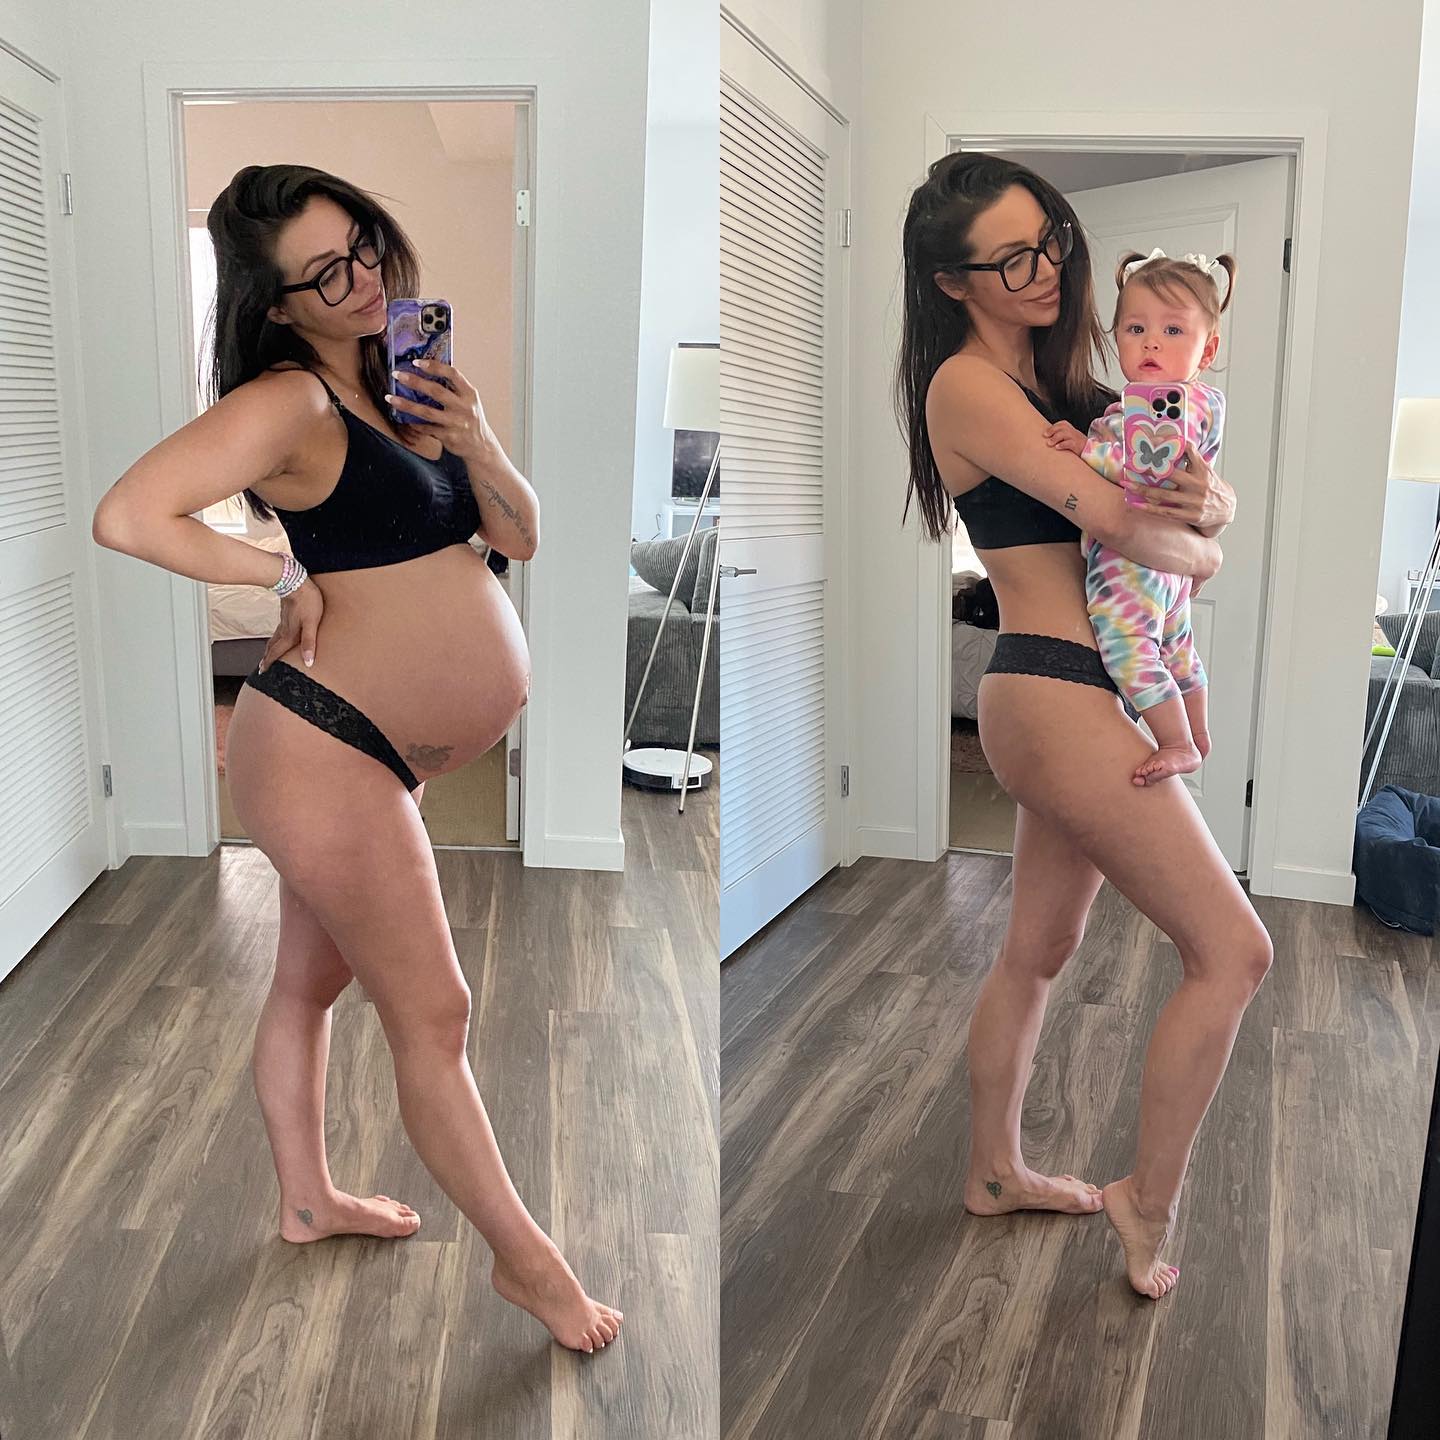 '40 Weeks Out’! Scheana Shay Holds Daughter Summer, Shows Postpartum Body